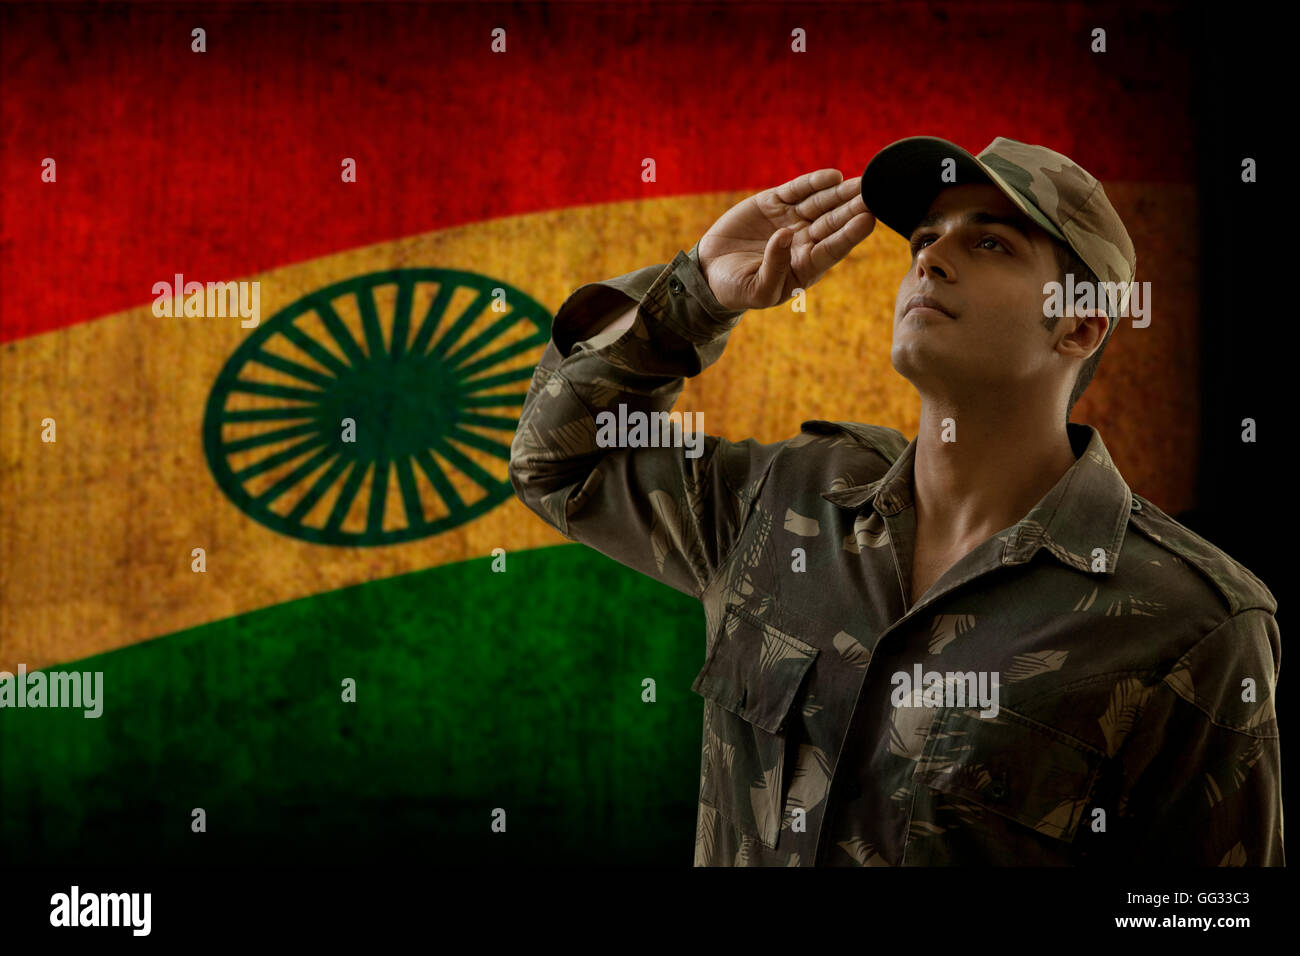 Soldier saluting with Indian flag in background Stock Photo